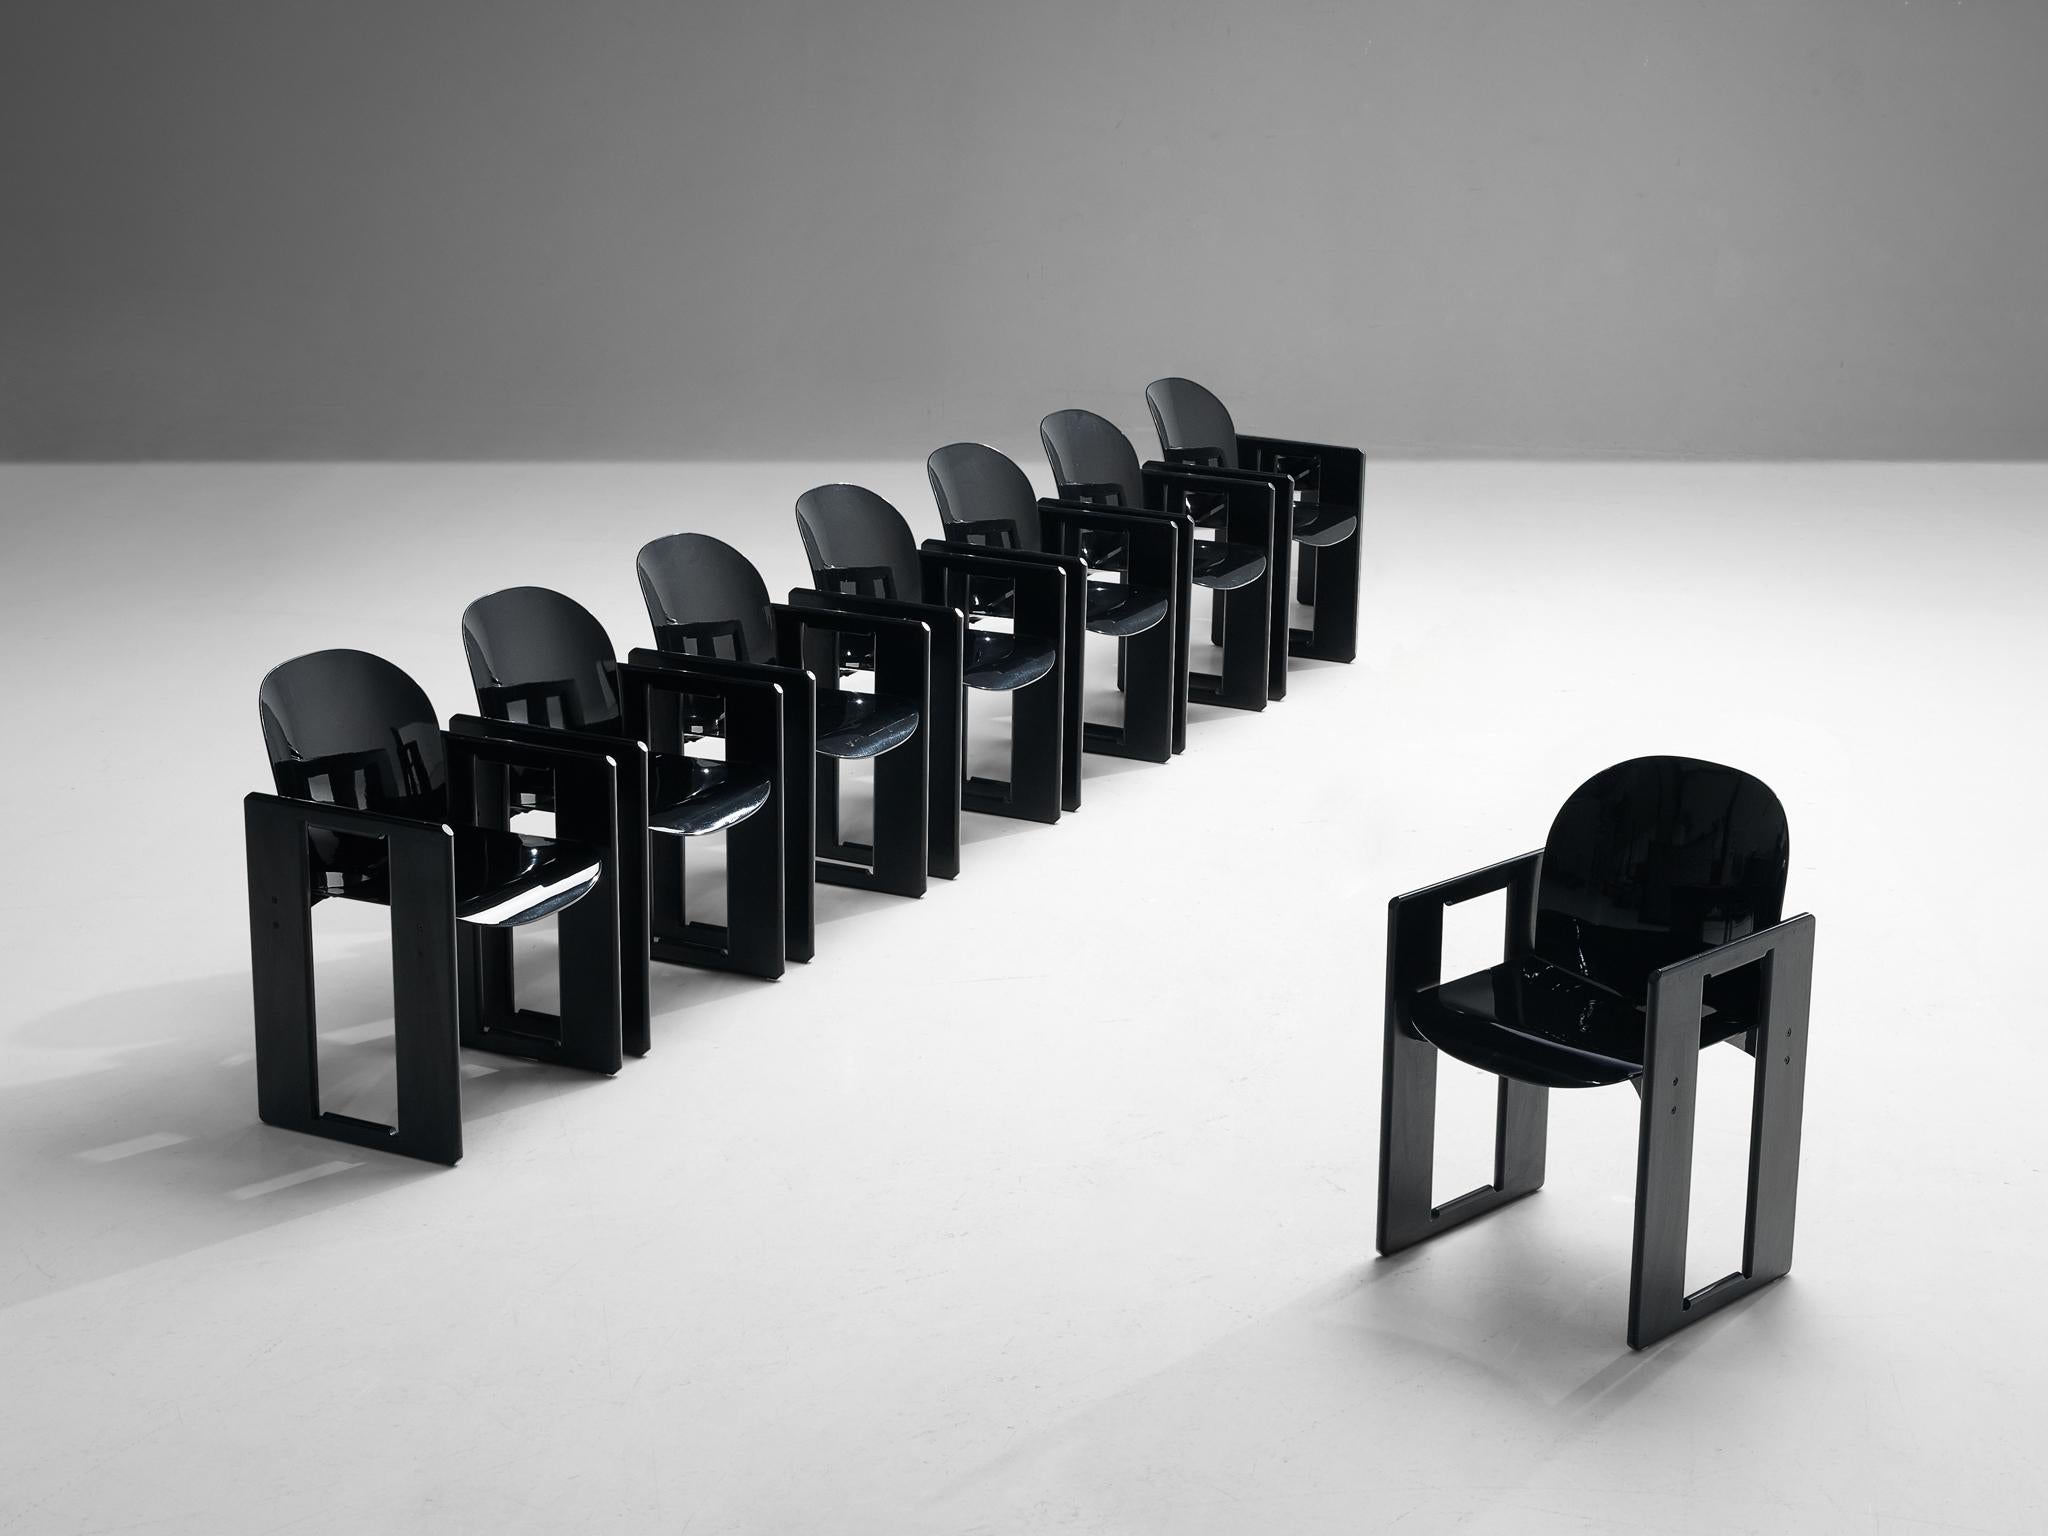 Afra and Tobia Scarpa for B&B Italia, set of eight ‘Dialogo’ dining chairs, black lacquered wood, fiberglass, Italy, 1970s
 
The ‘Dialogo’ dining chair was designed by Afra and Tobia Scarpa in the 1970s and convinces visually through its two angular